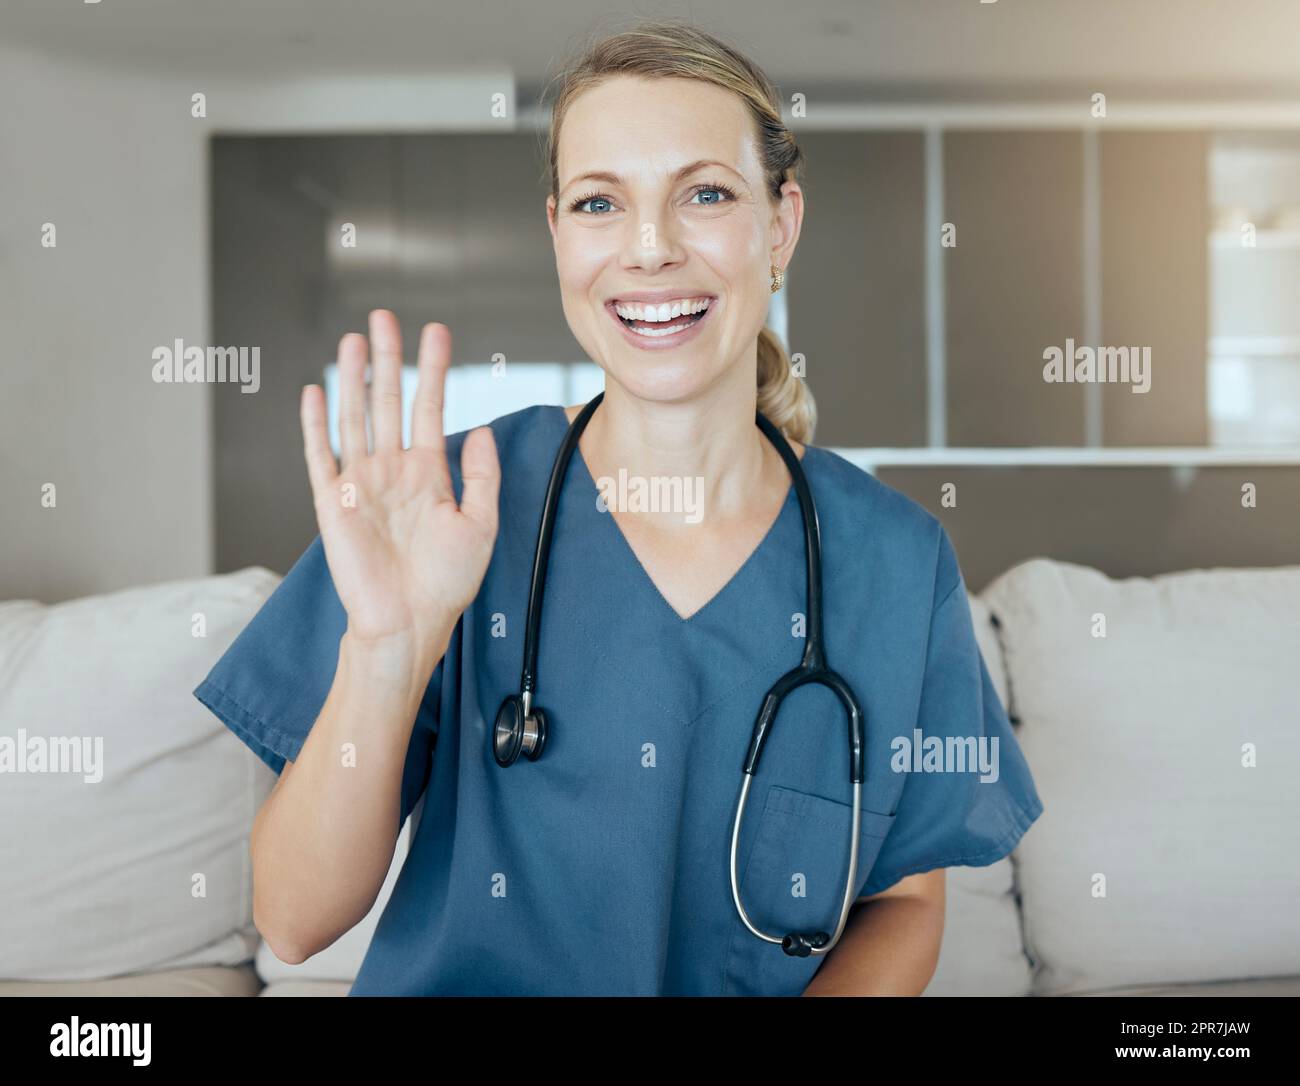 A beautiful young doctor looking happy and friendly while waiting on a sofa at work. Smiling caucasian health care worker talking and using hand gestures Stock Photo